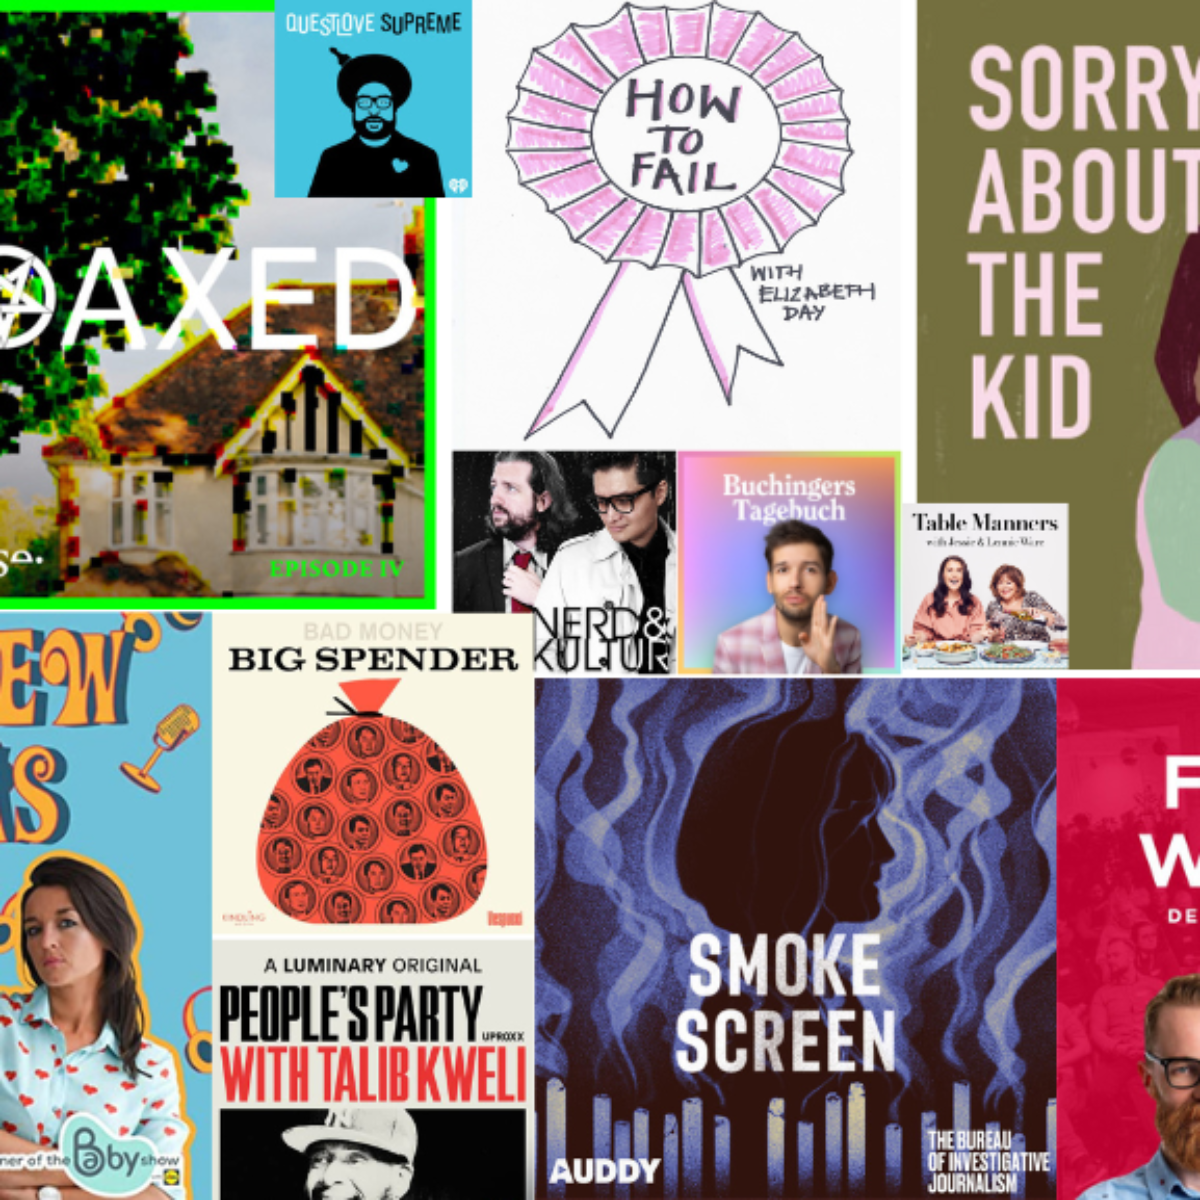 Top podcasts of the year 2022 – featuring podcasts like Hairy Bikers Agony Uncles, Bad Money: Big Spender, Sorry About The Kid, Smoke Screen, Hoaxed and more